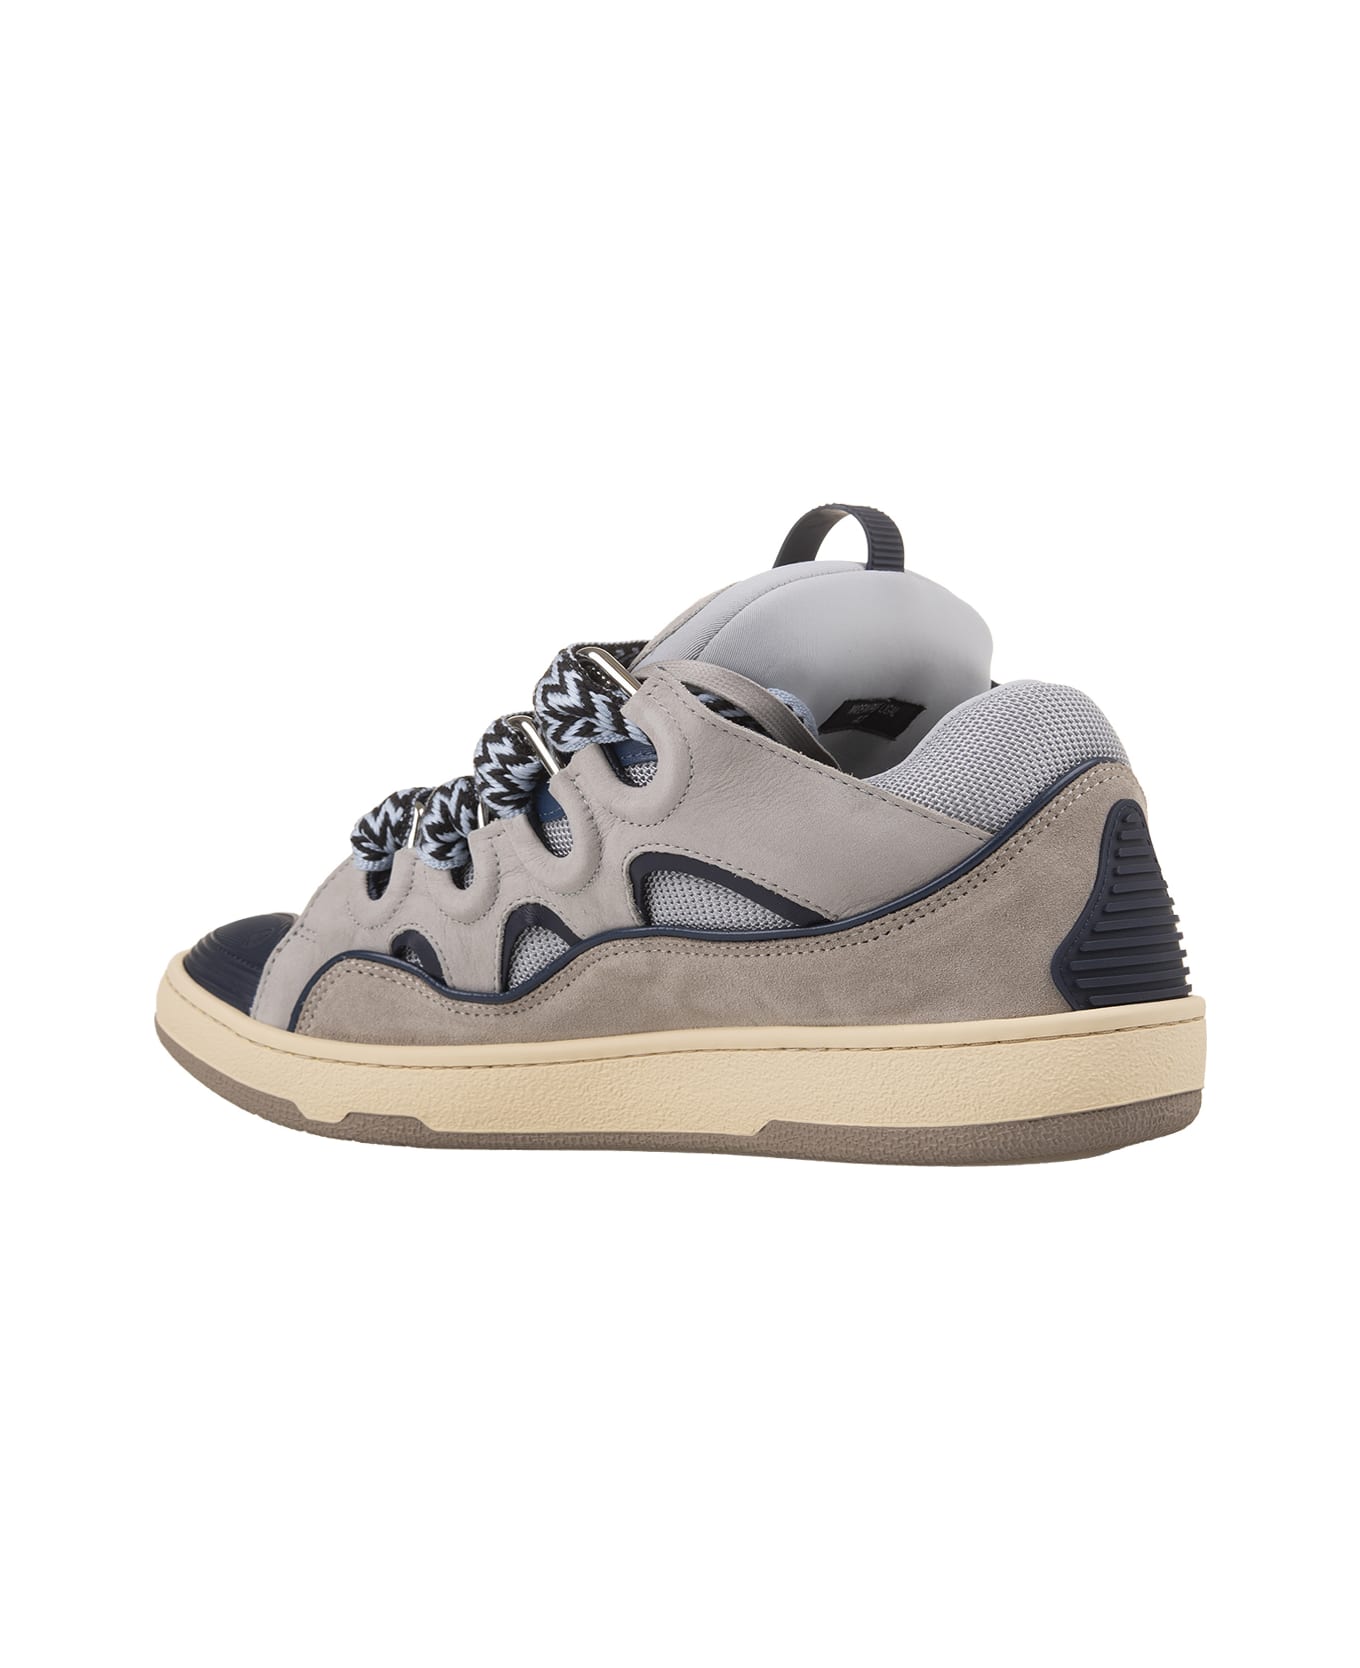 Lanvin "curb" Sneakers In Grey Leather - Grey